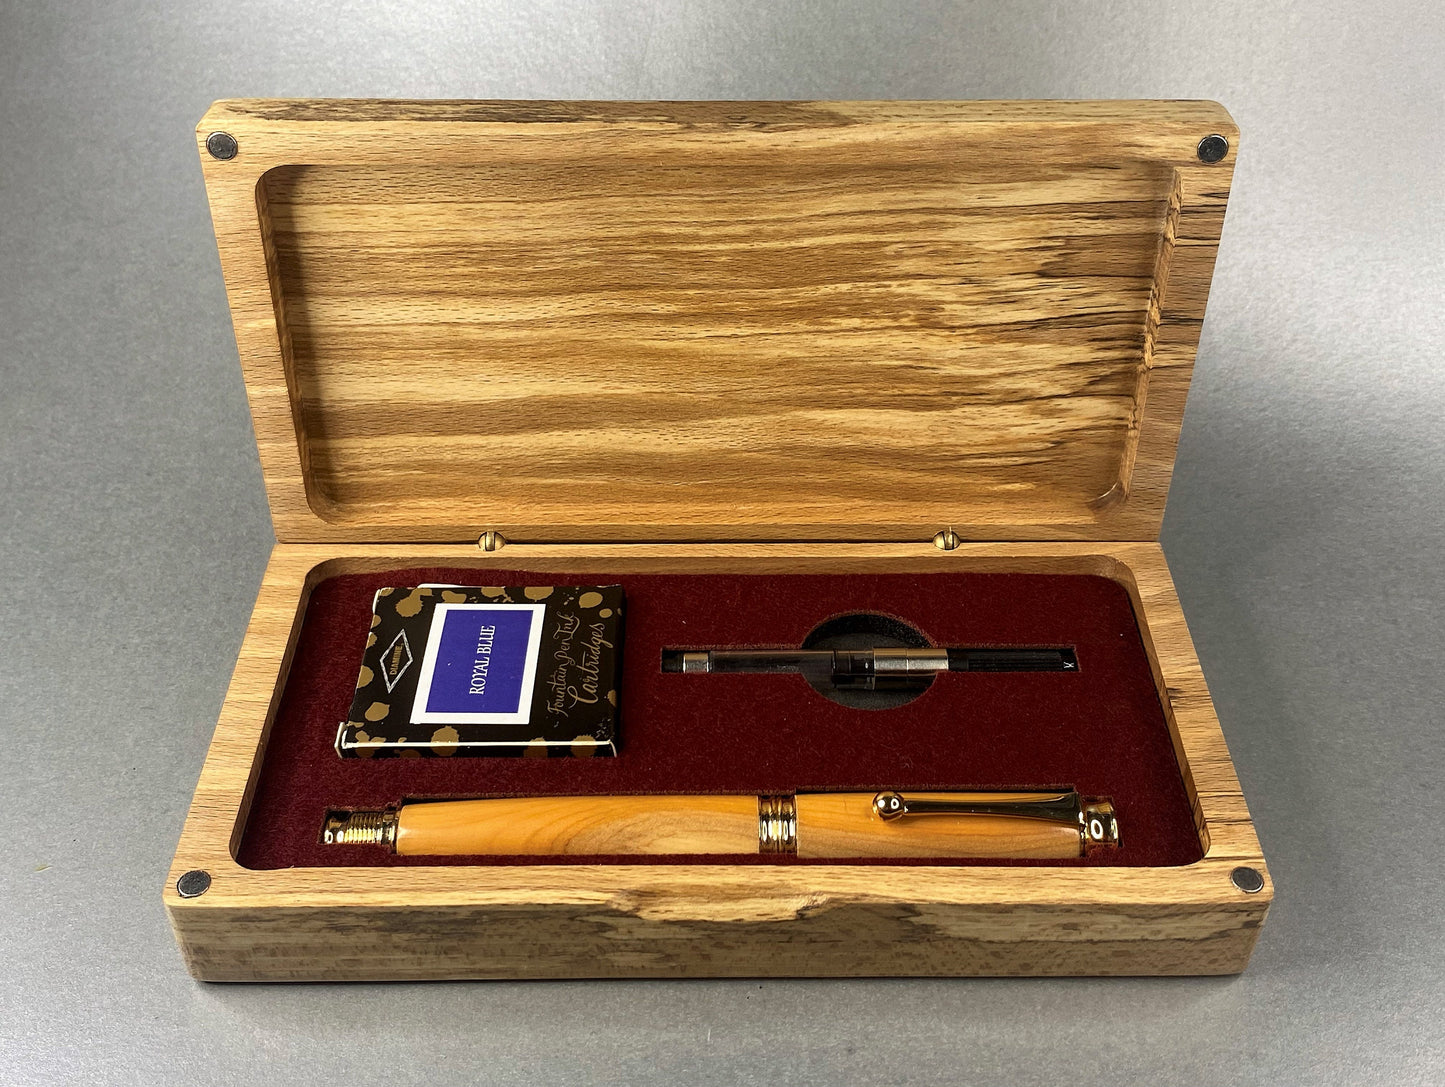 Open lidded Spalted Beech wood box showing the hand turned Fountain pen made in English Yew wood with Gold plated fittings